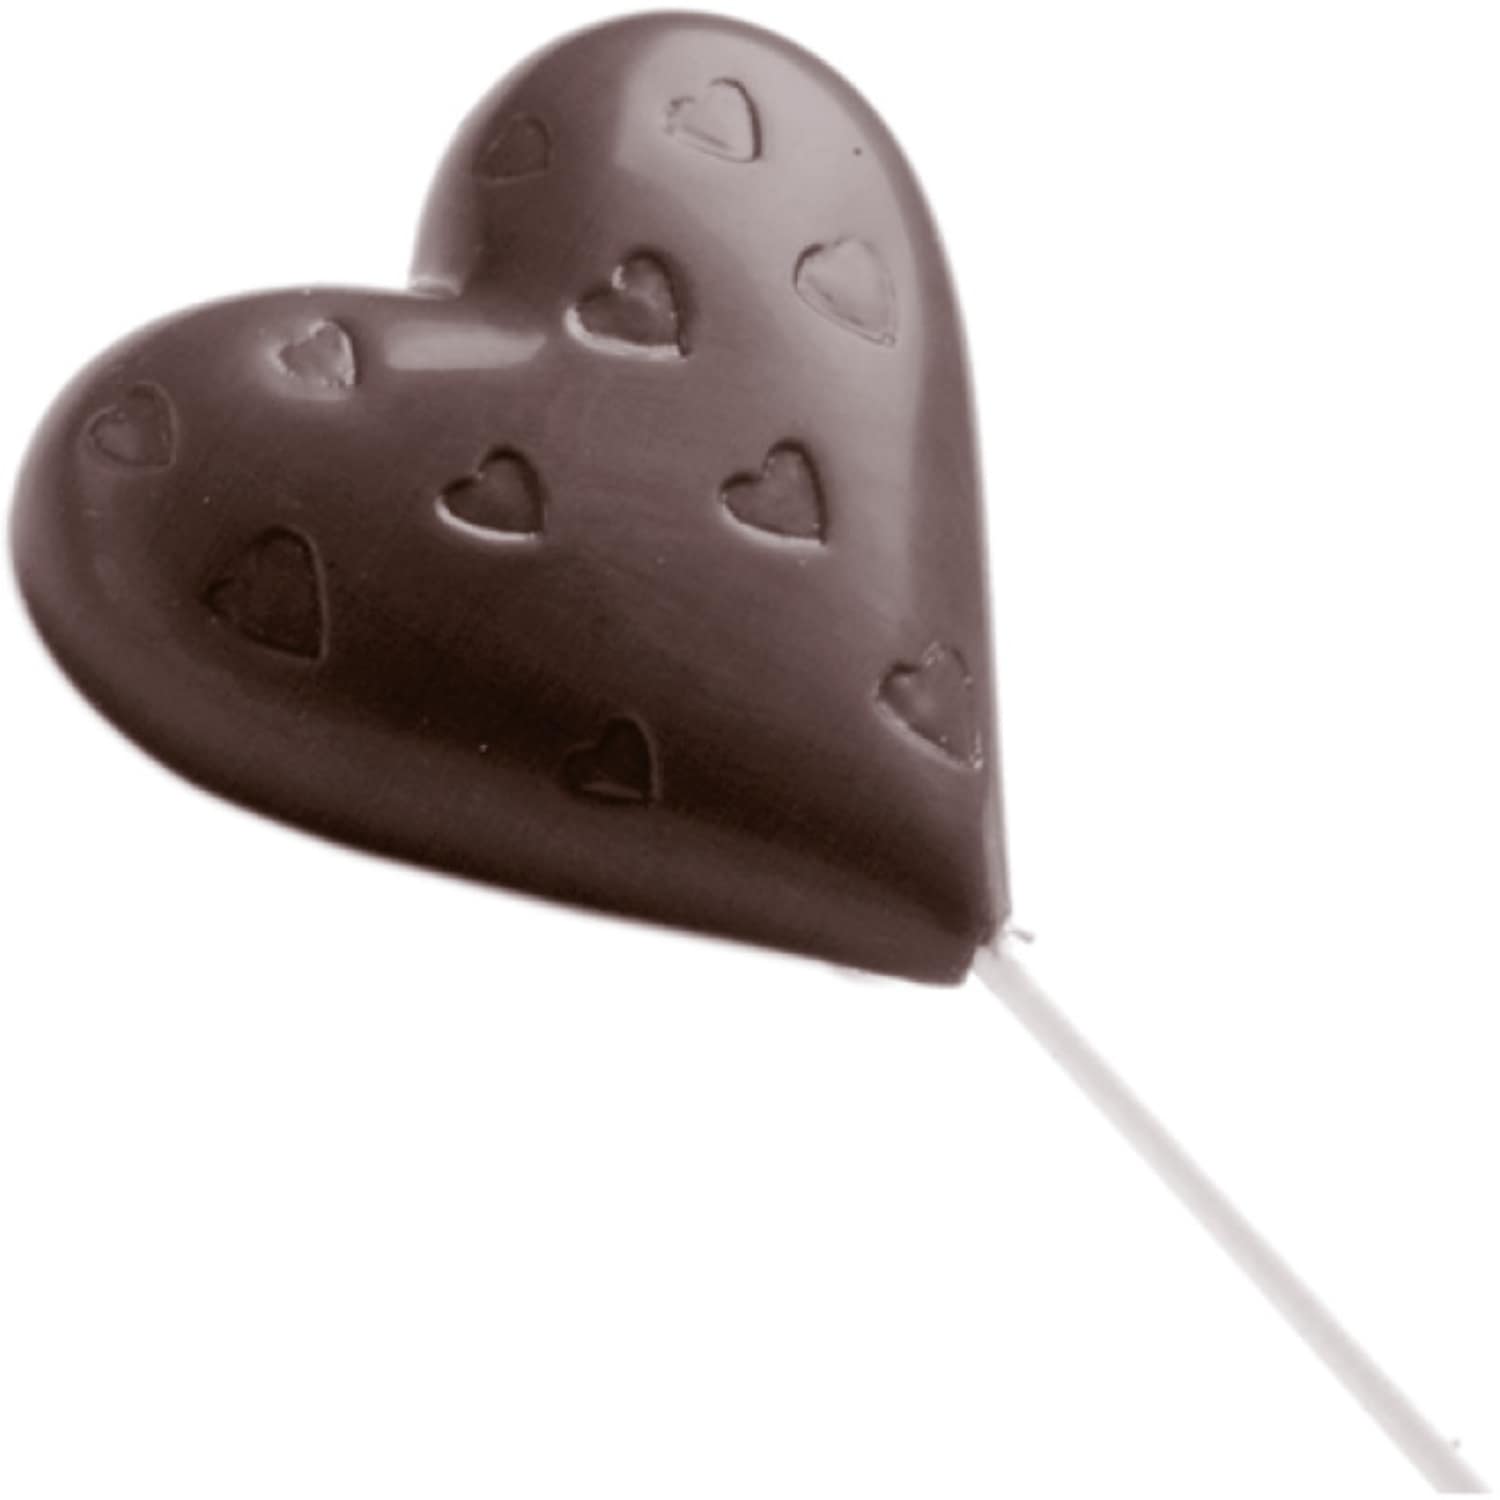 Chocolate mould "Lollies" 421480